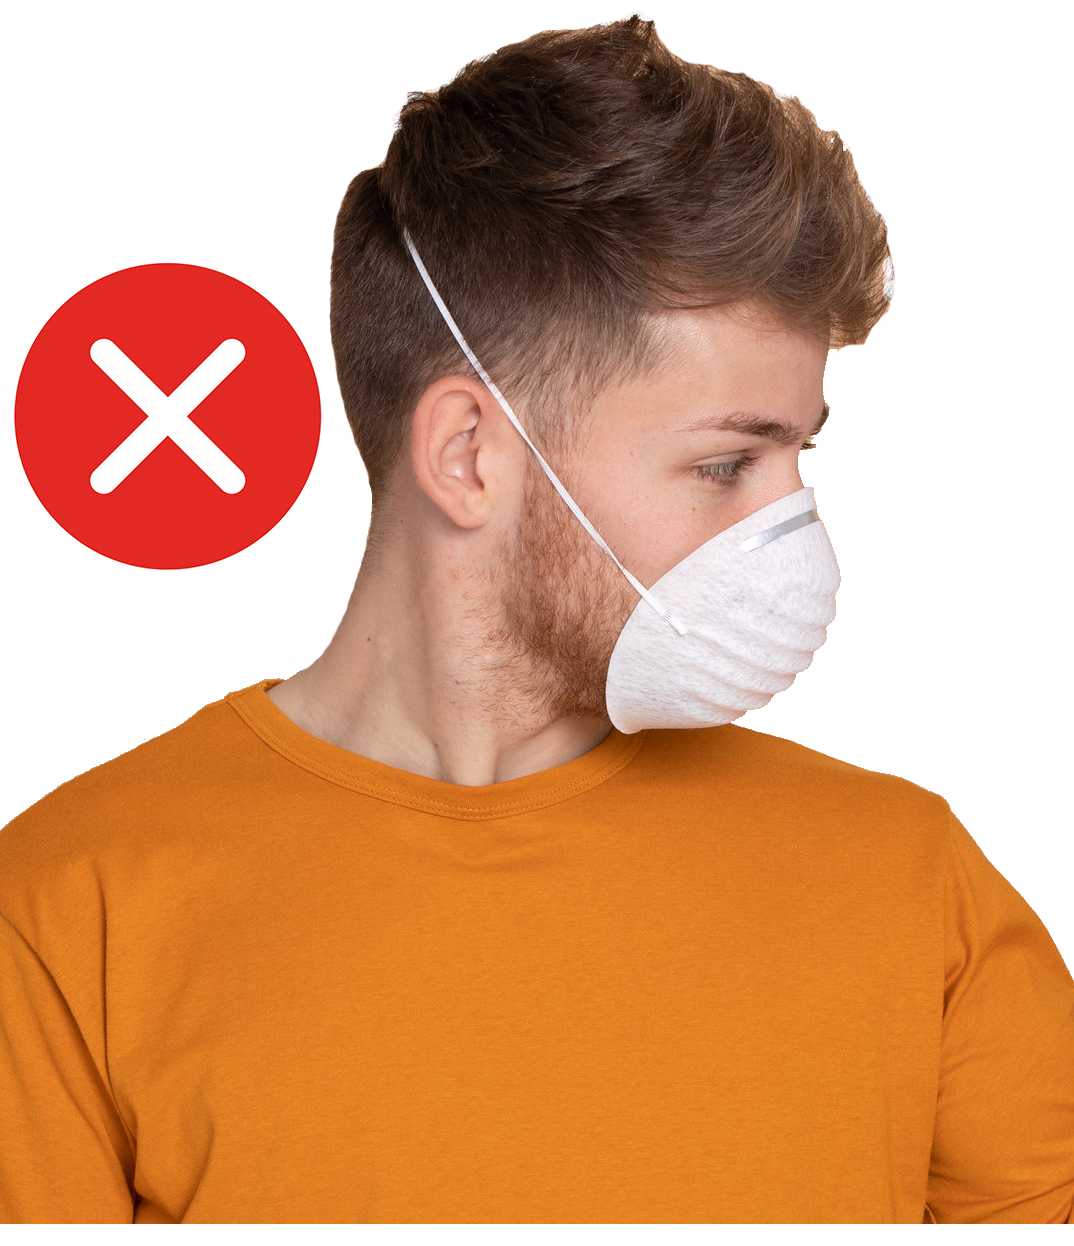 Facial hair will interfere with the correct fit of a respirator or mask.